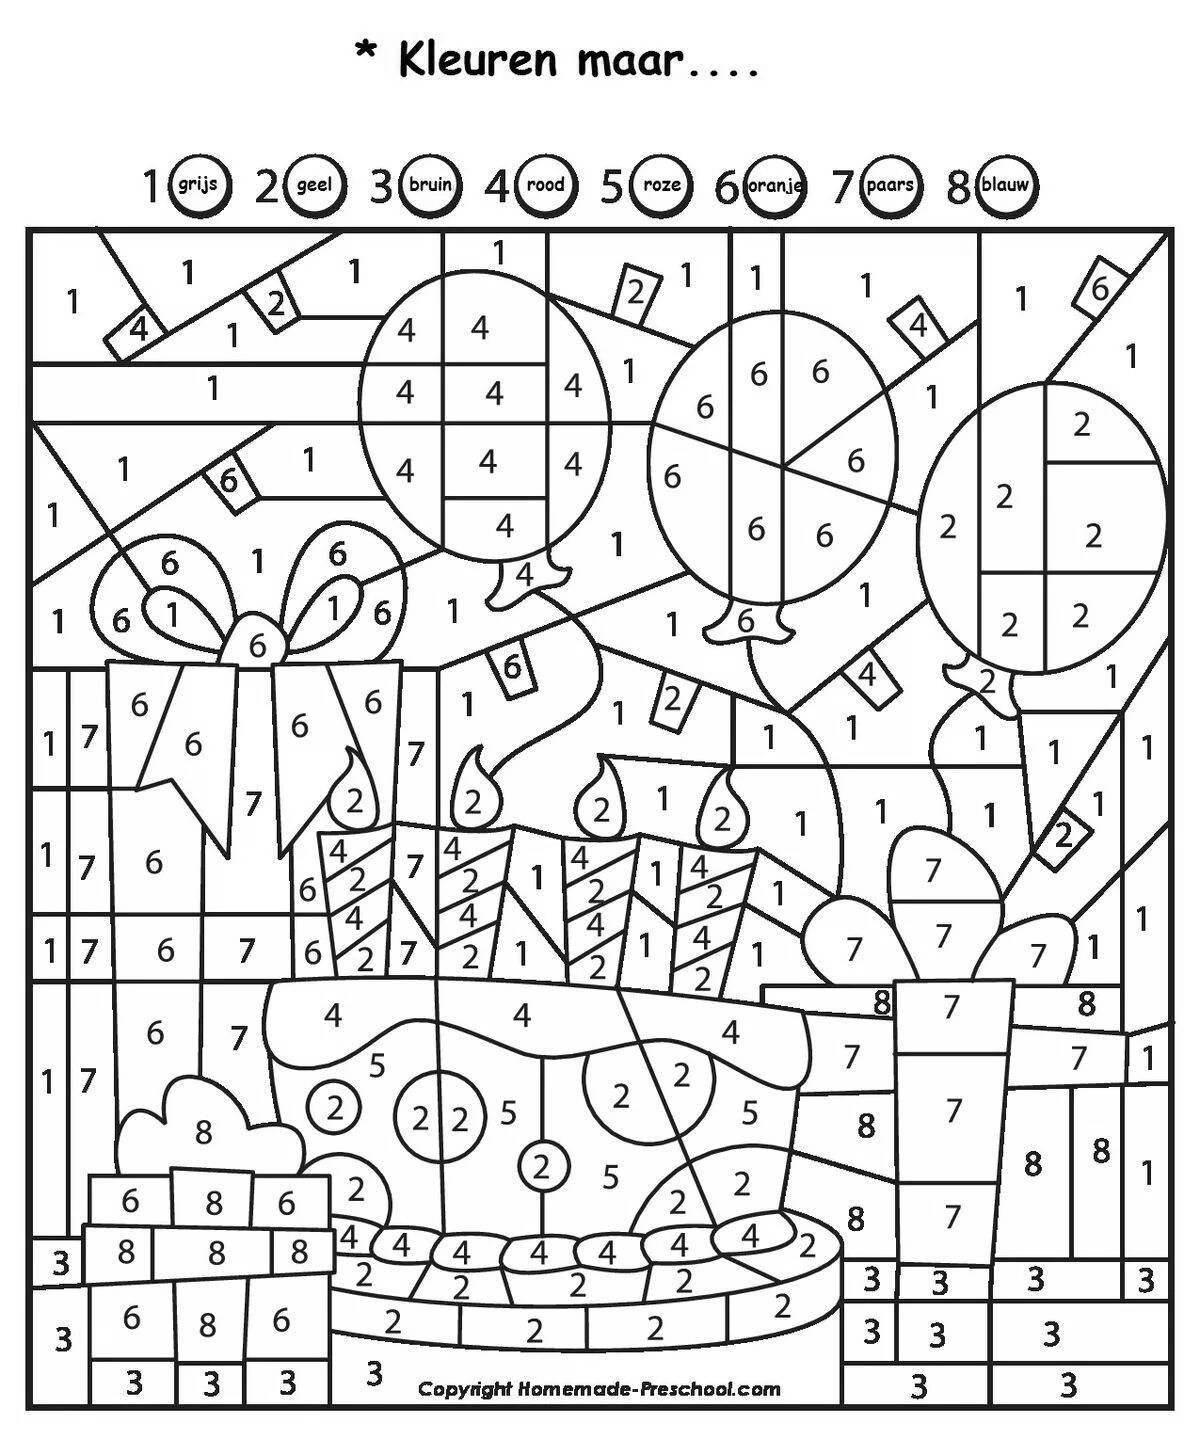 A fun coloring book with letters and numbers for preschoolers